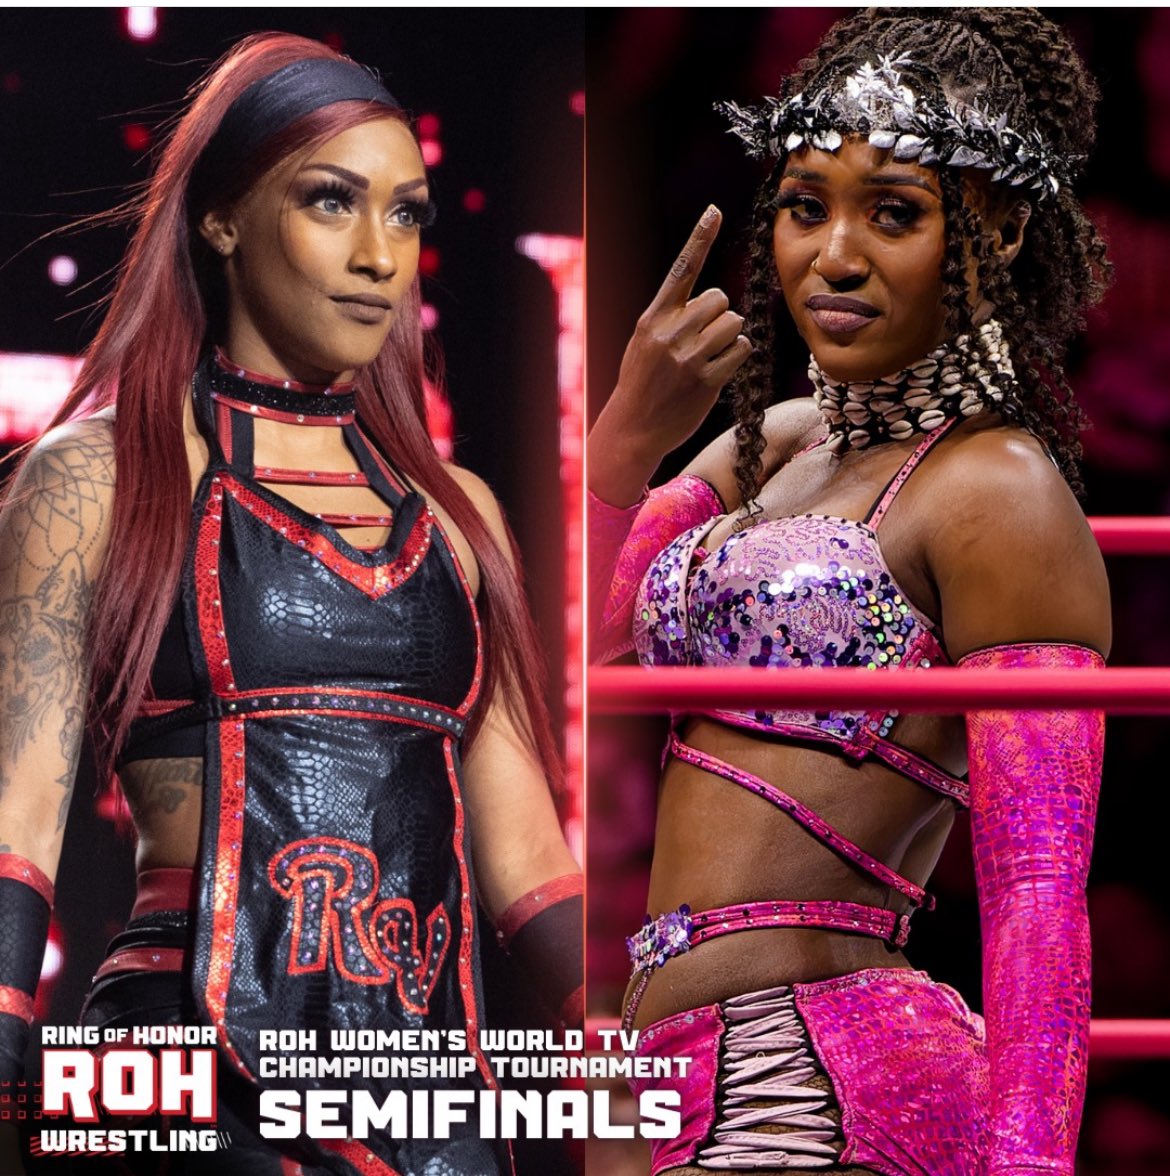 One step closer to becoming the ROH Women’s Tv Champion. On todays menu …. The Juicy Queen @amisylle. Better bring your absolute best cause The Chef ALWAYS delivers 👩🏾‍🍳 Catch this Semi-Finals match tonight on Watchroh.com 7/6c @ringofhonor